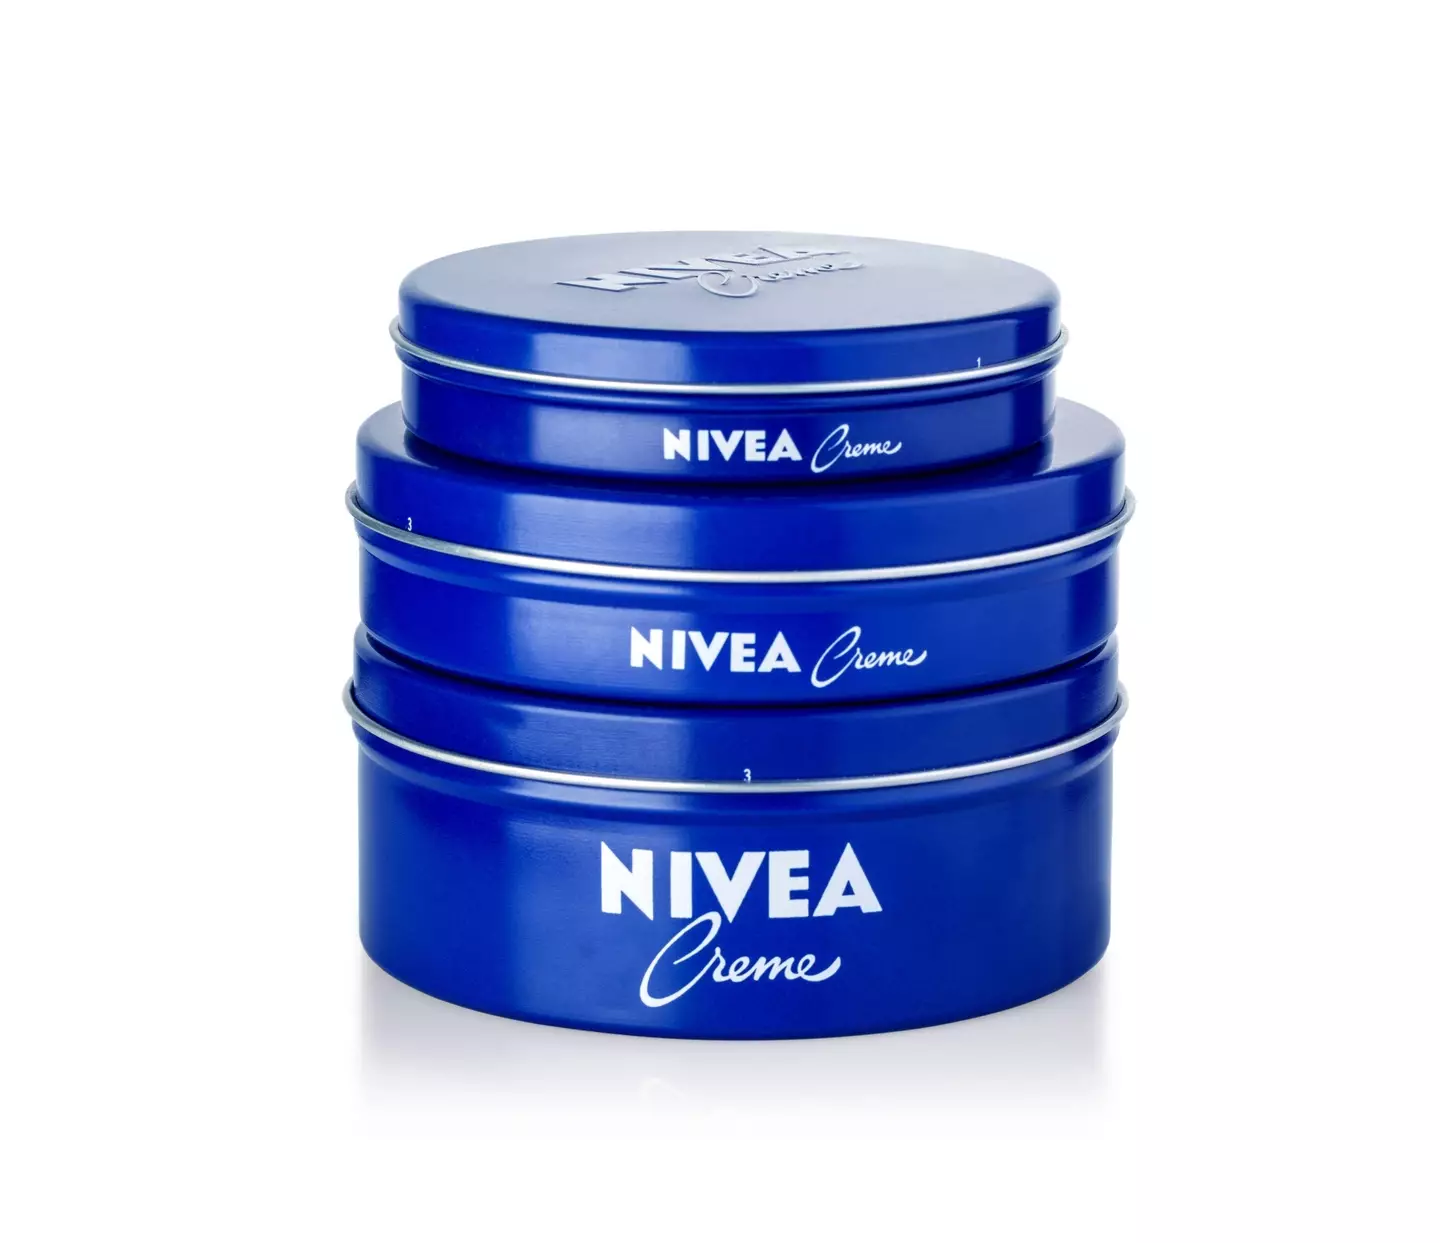 Joan credits Nivea Creme for her youthful appearance.